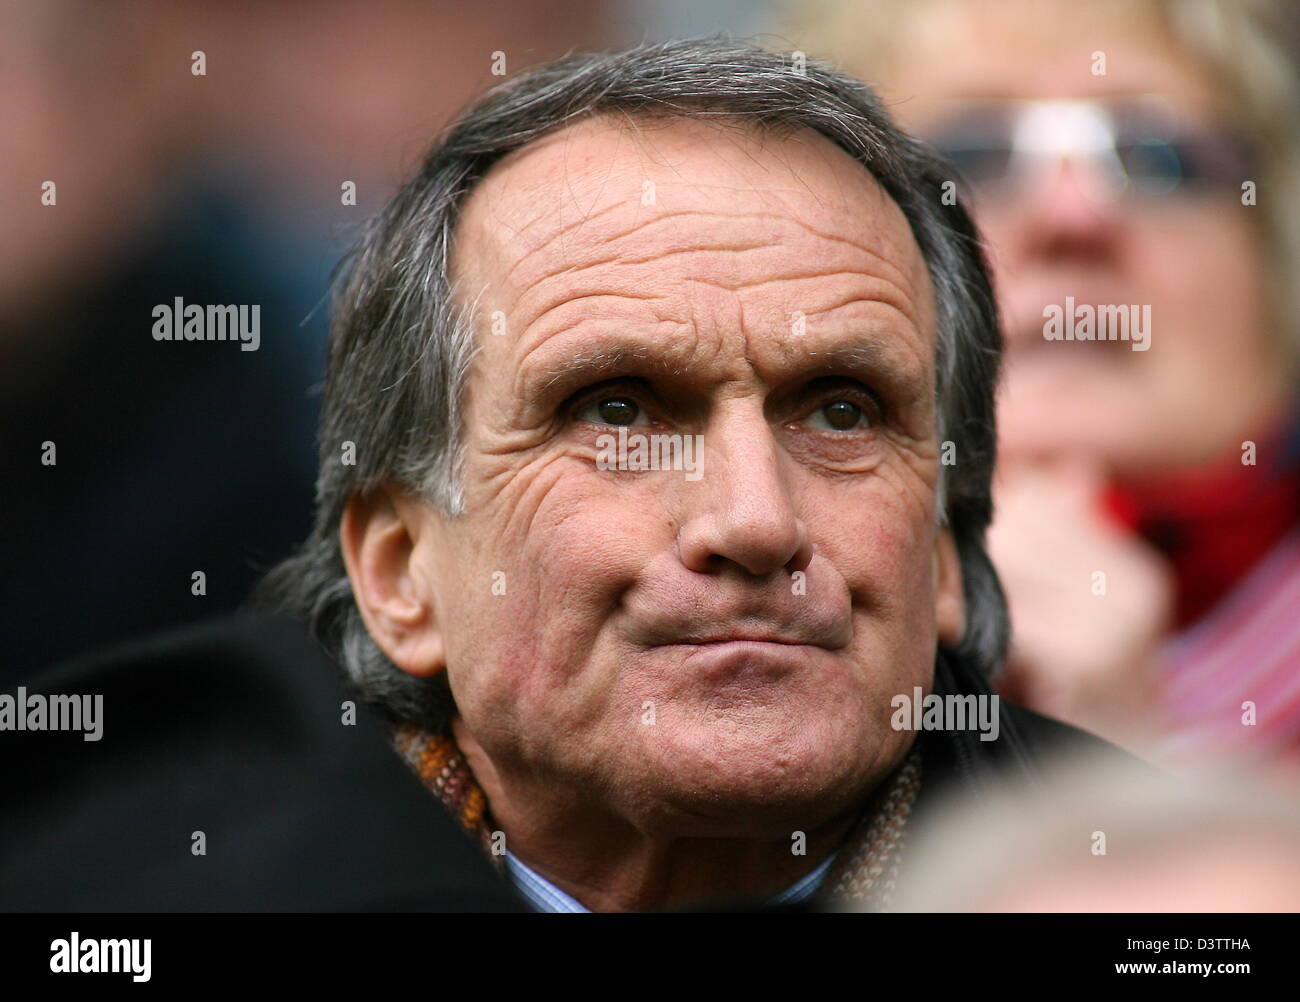 Stock Photo - The photo shows Wolfgang Overath, president of 1st FC Cologne, during the 2nd Bundesliga match against SC Freiburg at the Badenova stadium in ... - the-photo-shows-wolfgang-overath-president-of-1st-fc-cologne-during-D3TTHA